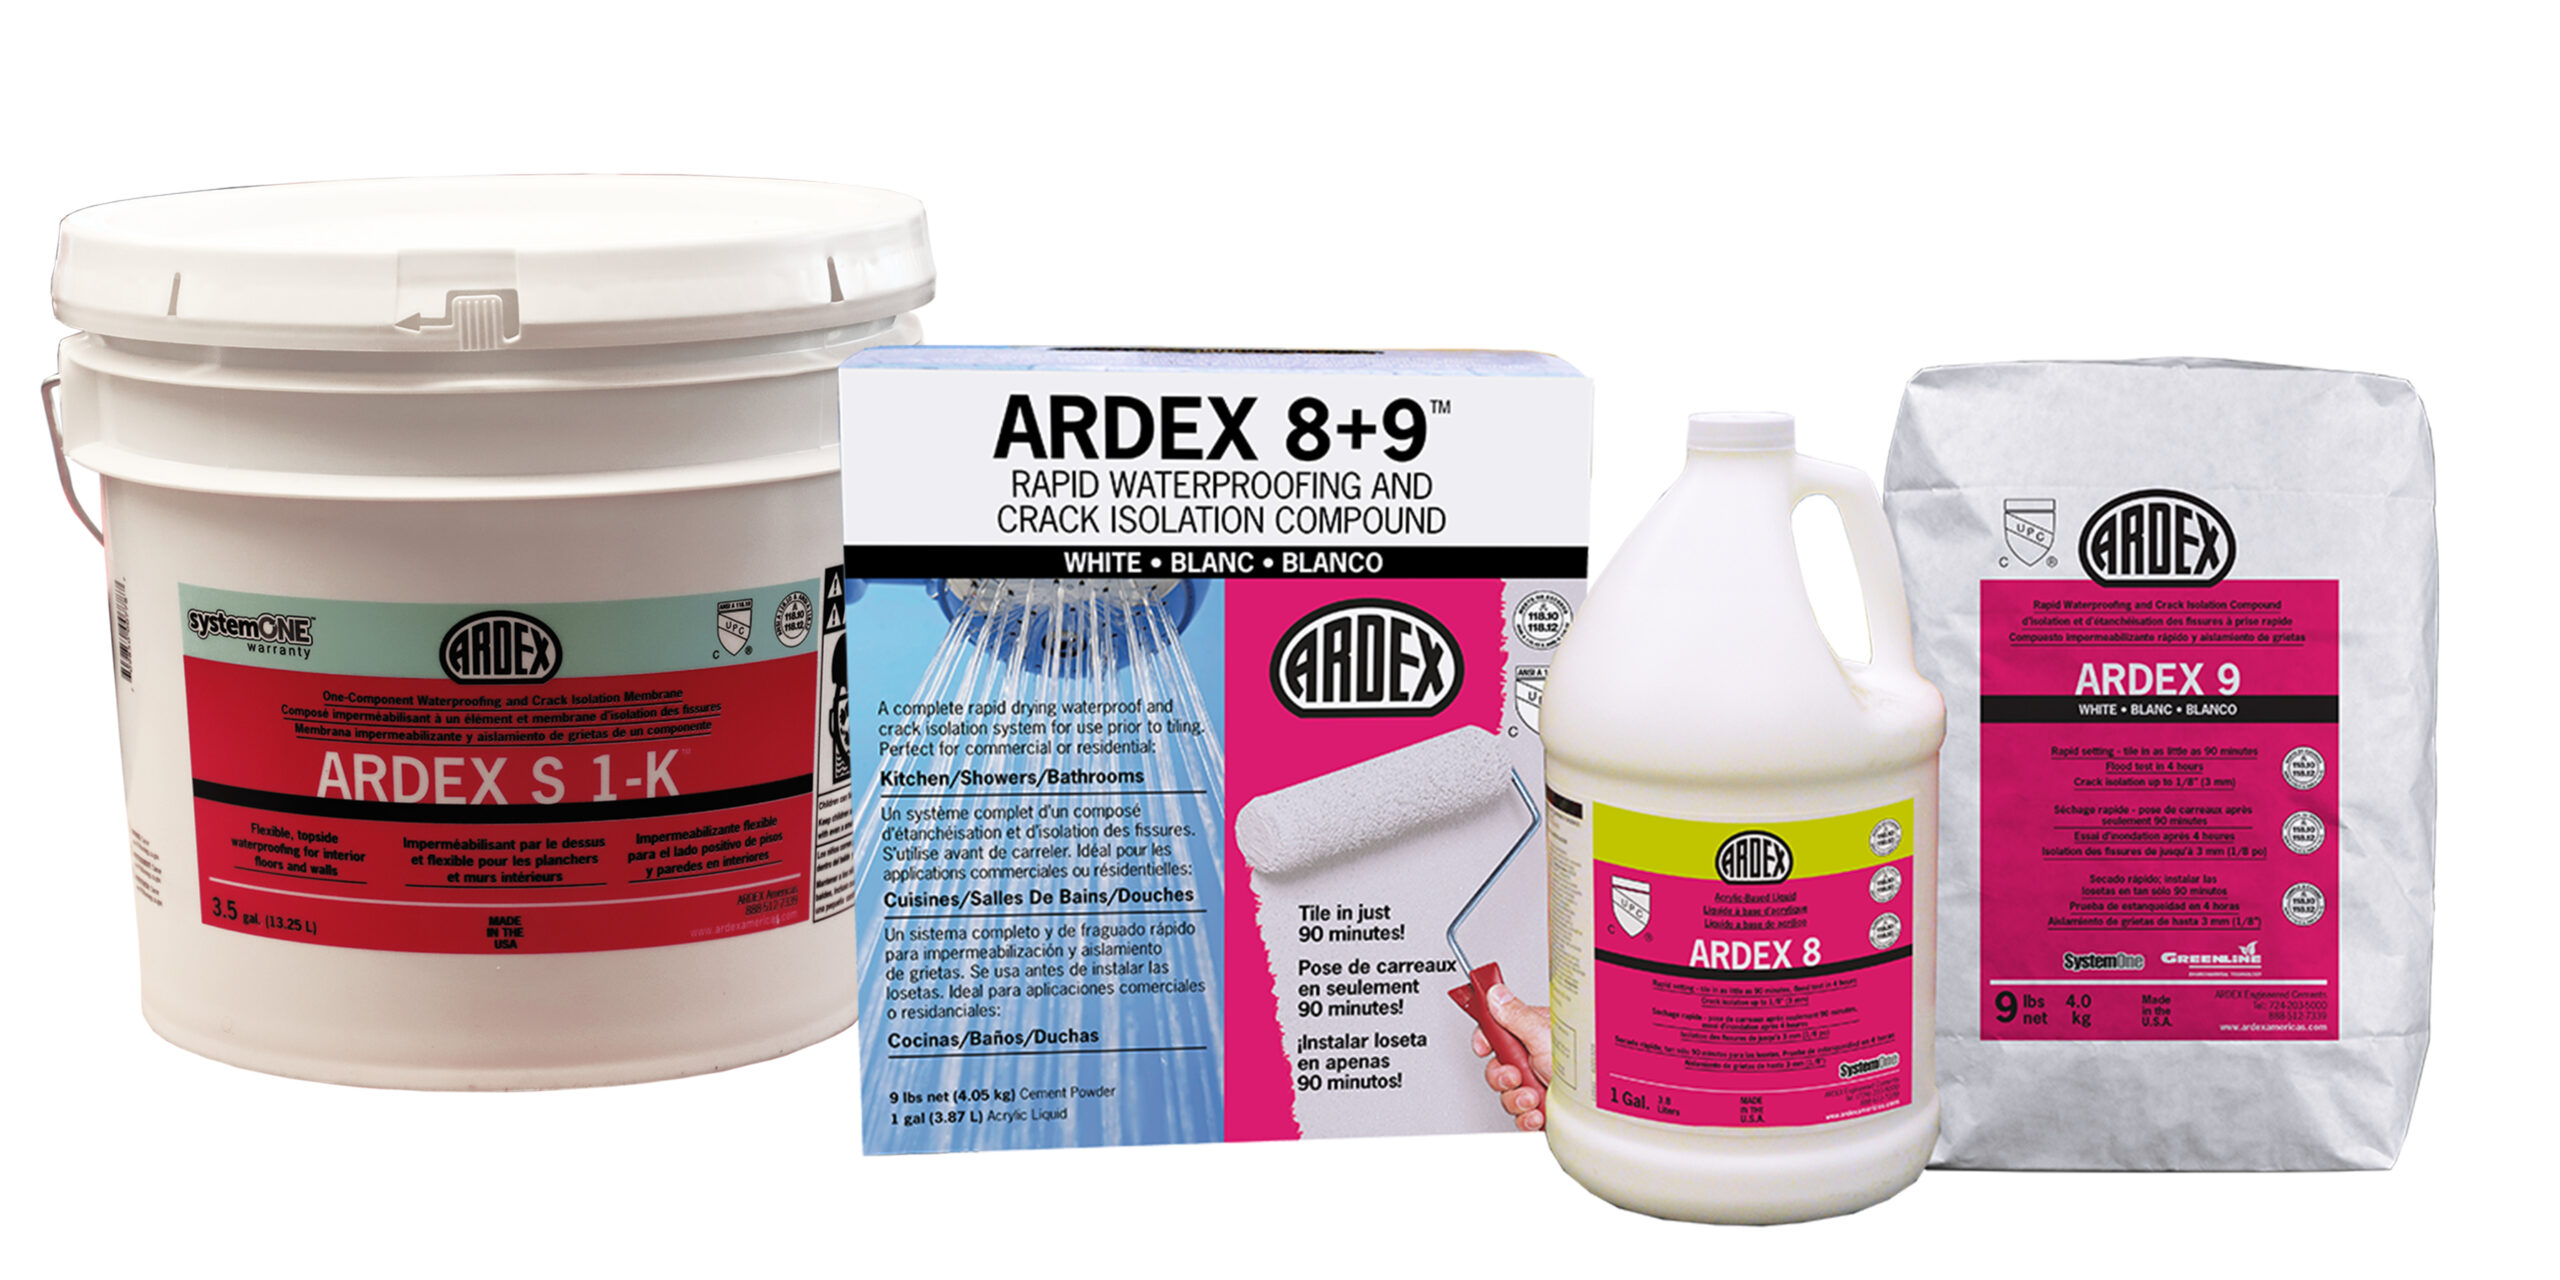 Ardex Waterproofing Products